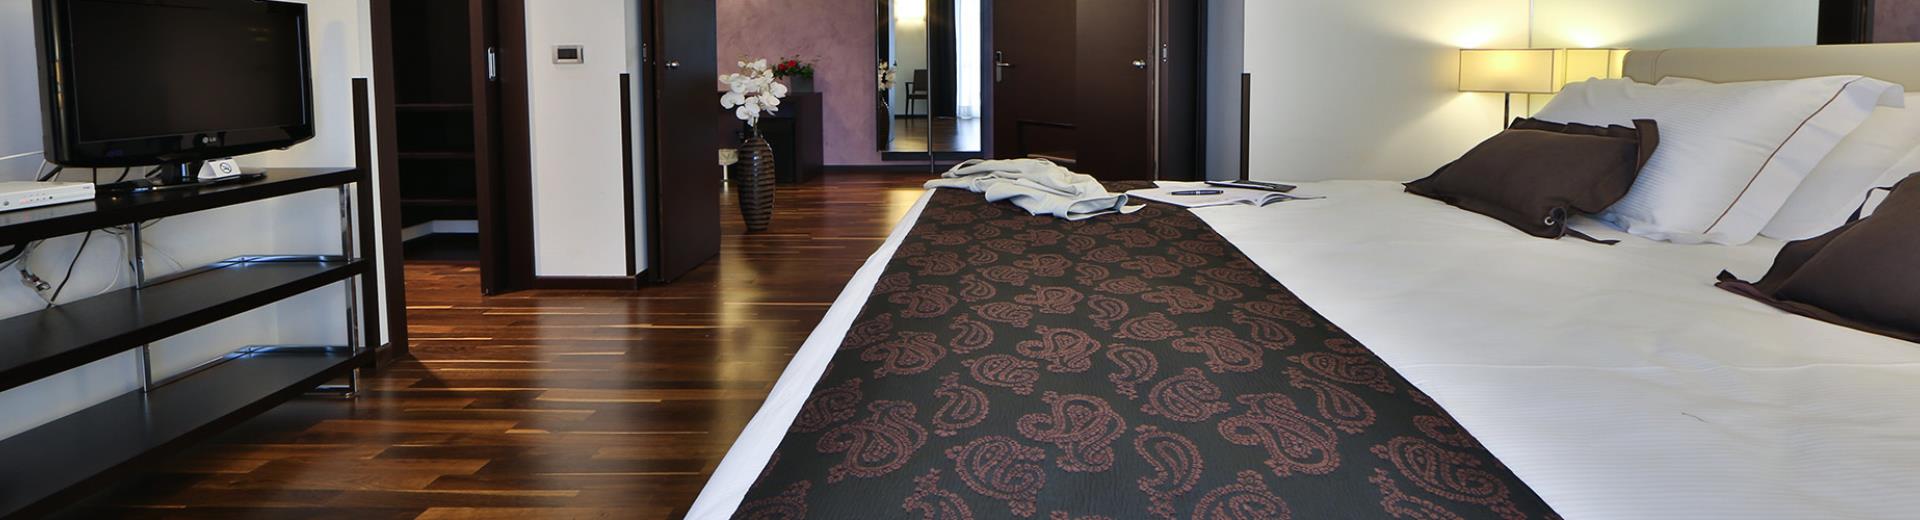  Looking for a hotel for your stay in Padova (PD)? Book/reserve at the Best Western Hotel Biri